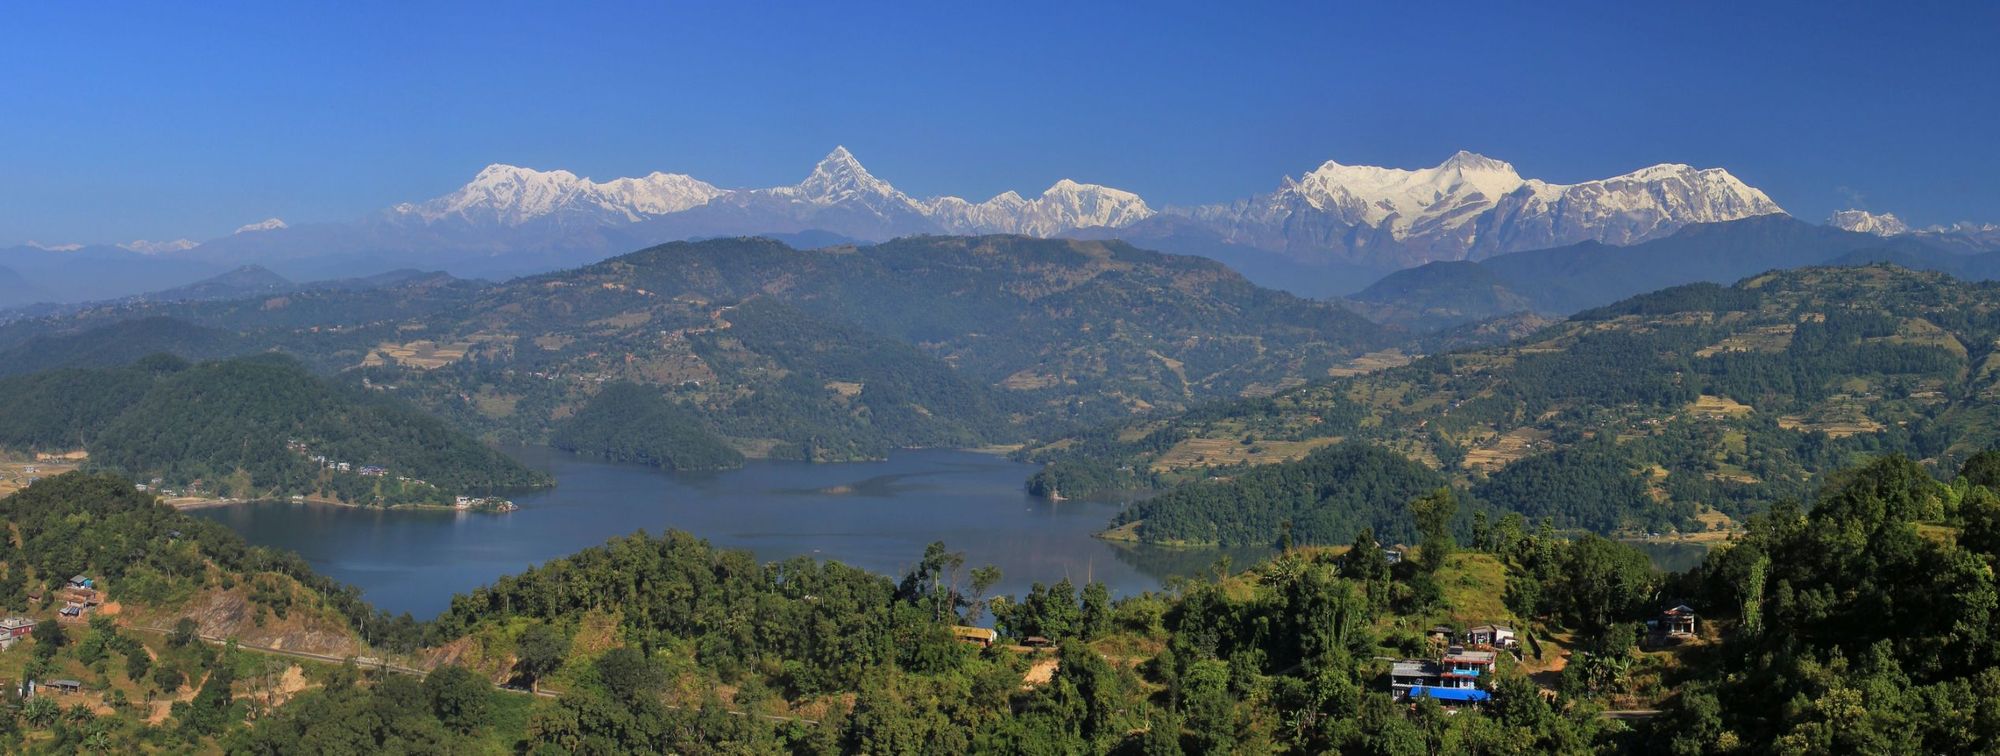 Begnas Lake, where the Royal Trek ends, with the beautiful backdrop of the Annapurna range